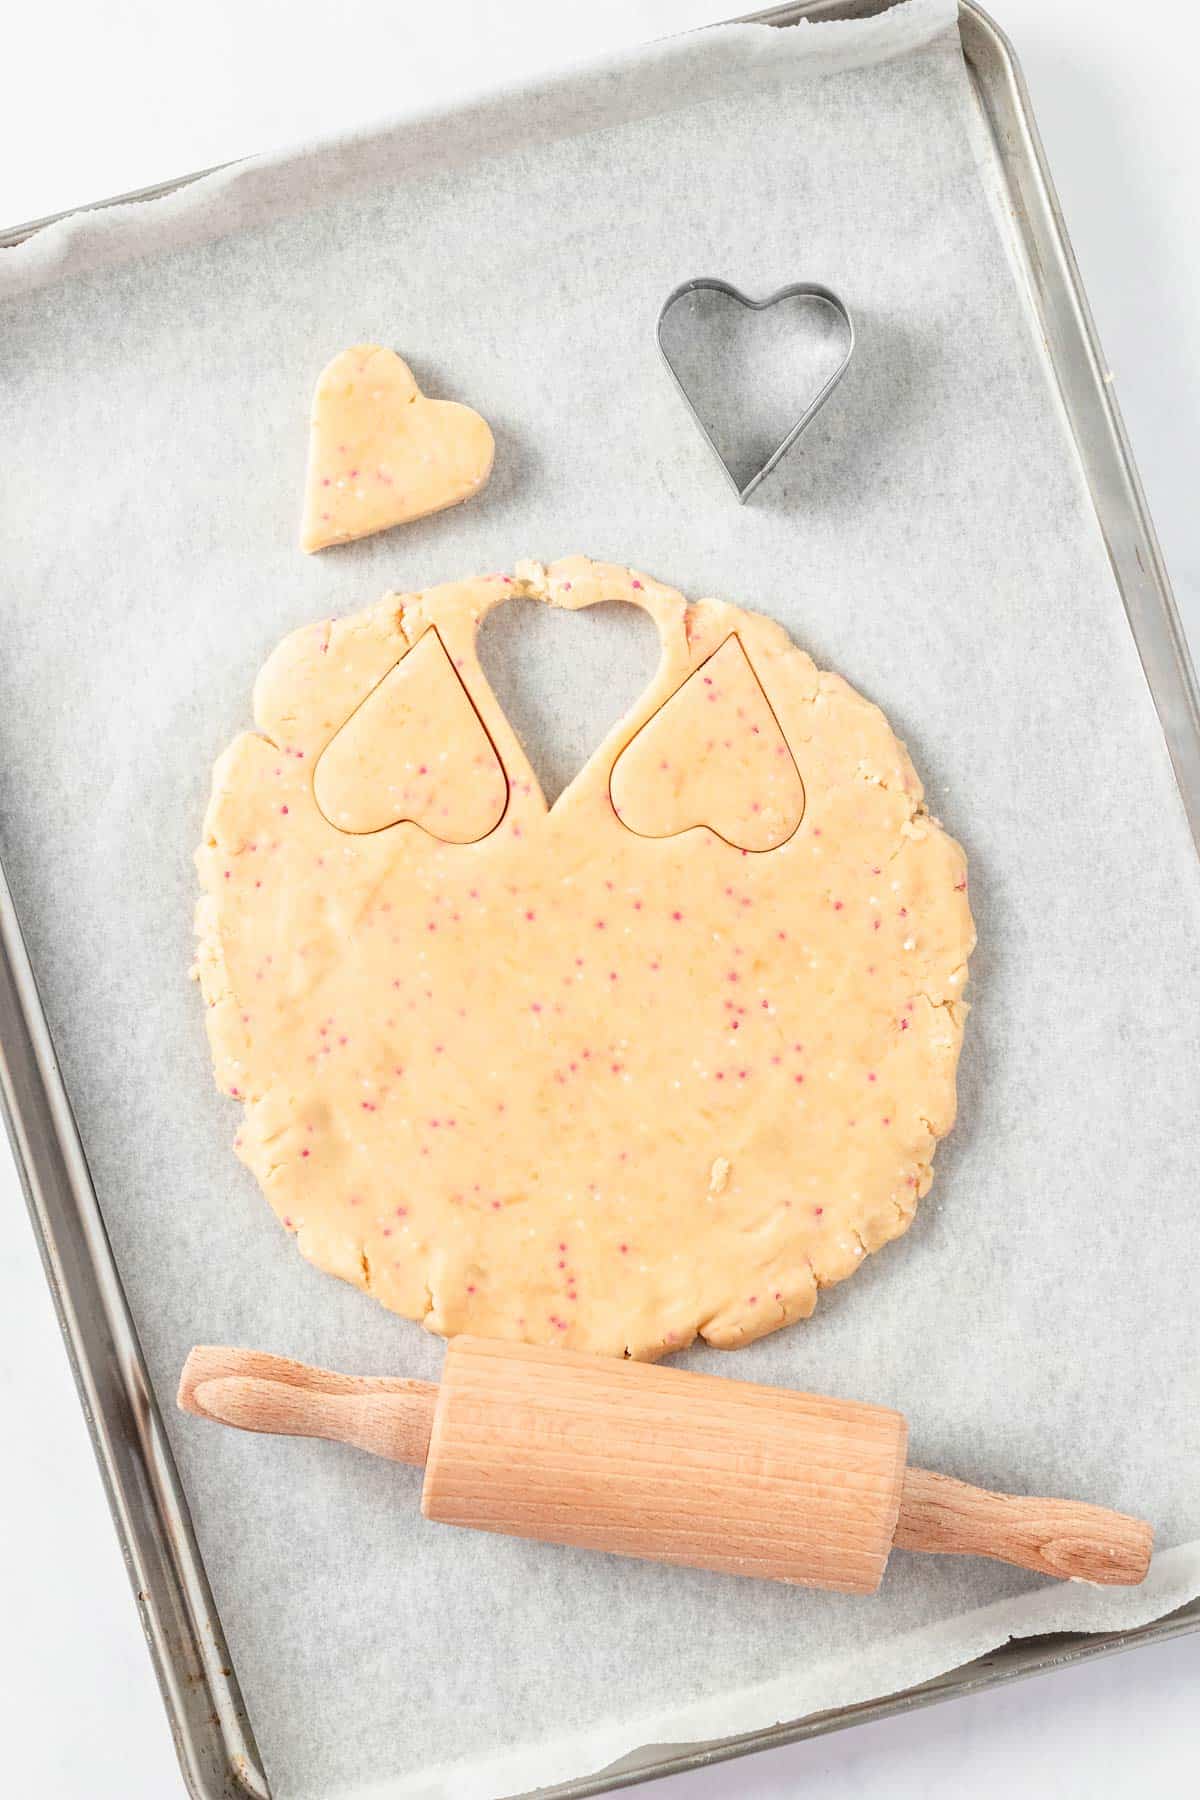 shortbread cookie batter with heart shaped cookie cutter